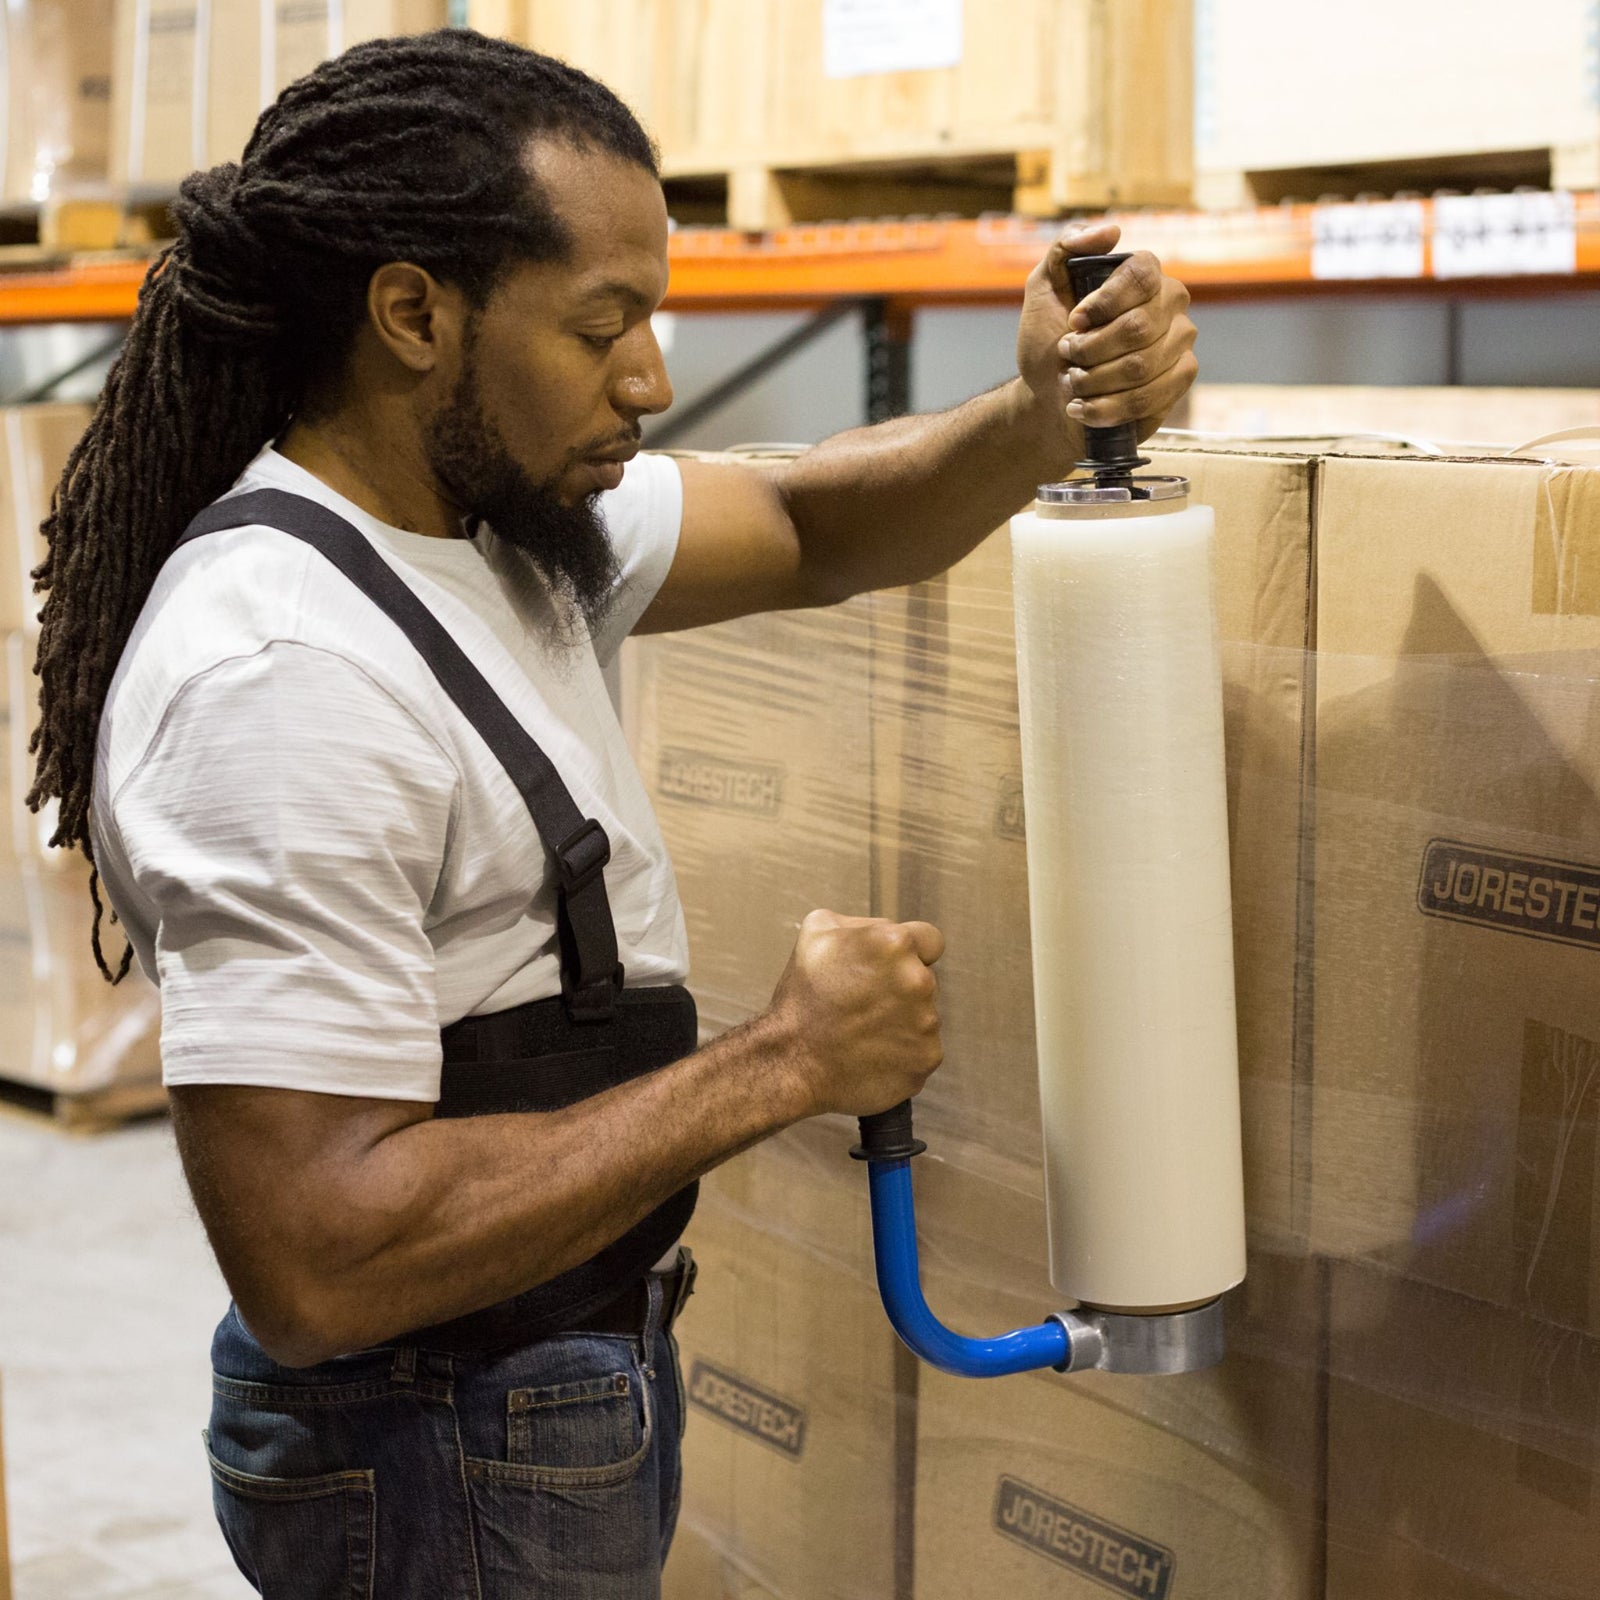 Man in a warehouse wearing a white shirt, jeans and a black back support belt is using the stretch film dispenser to neatly stretch wrap a stack of boxes.